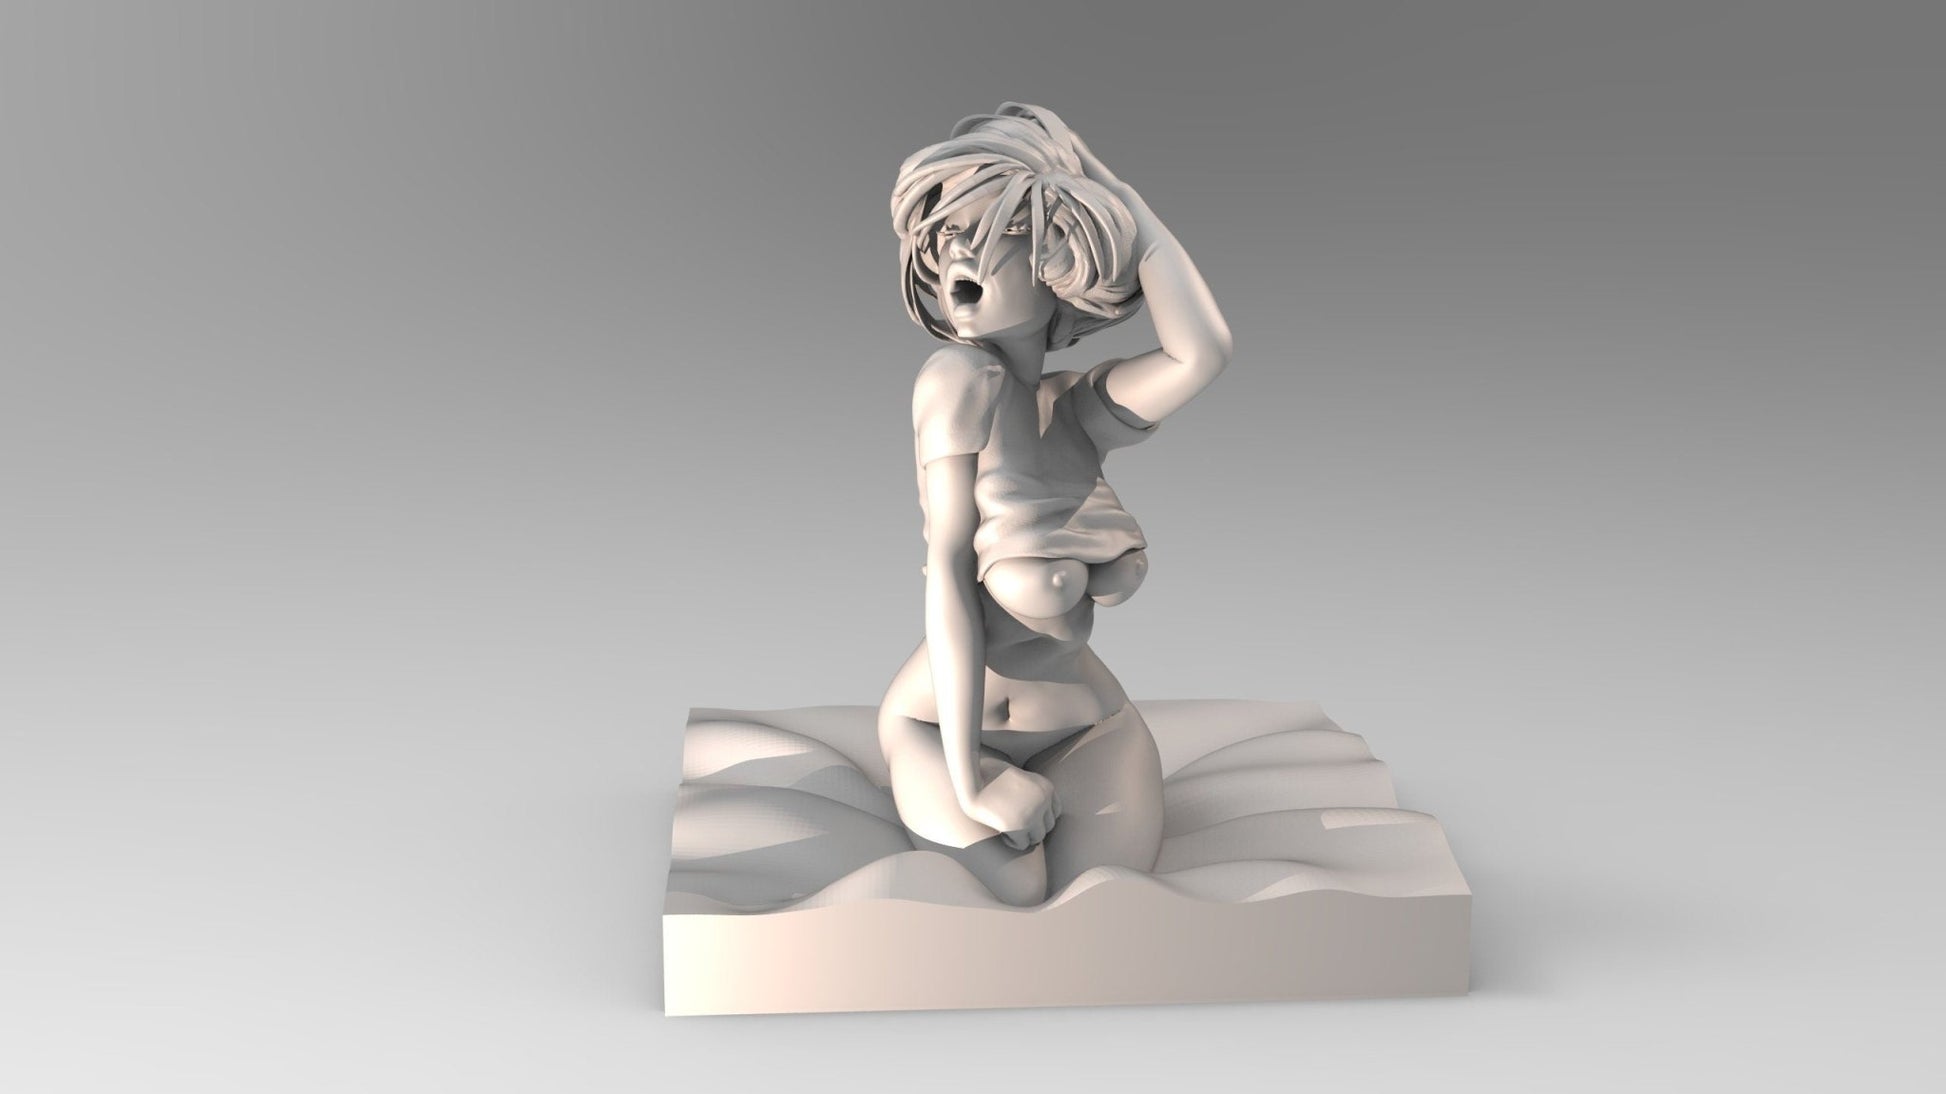 Pinup Girl Vol.1 KITTY | 35mm / 75mm | 3D Printed | Unpainted | Sexy | Pin|up | NSFW Version | Figurine | Figure | Miniature | Sexy |